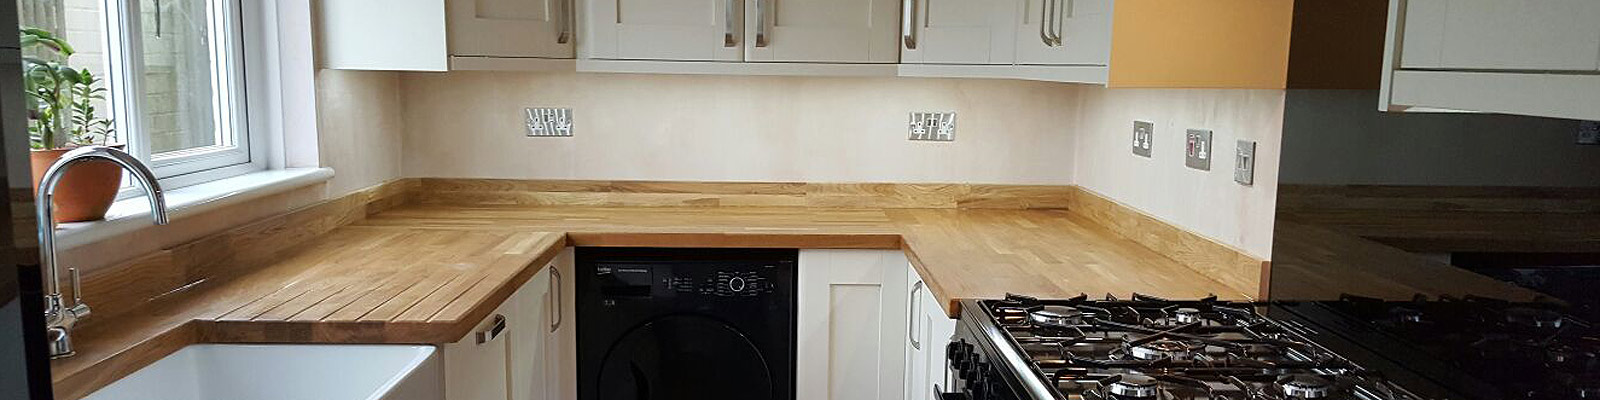 Kitchen Installers in Southampton